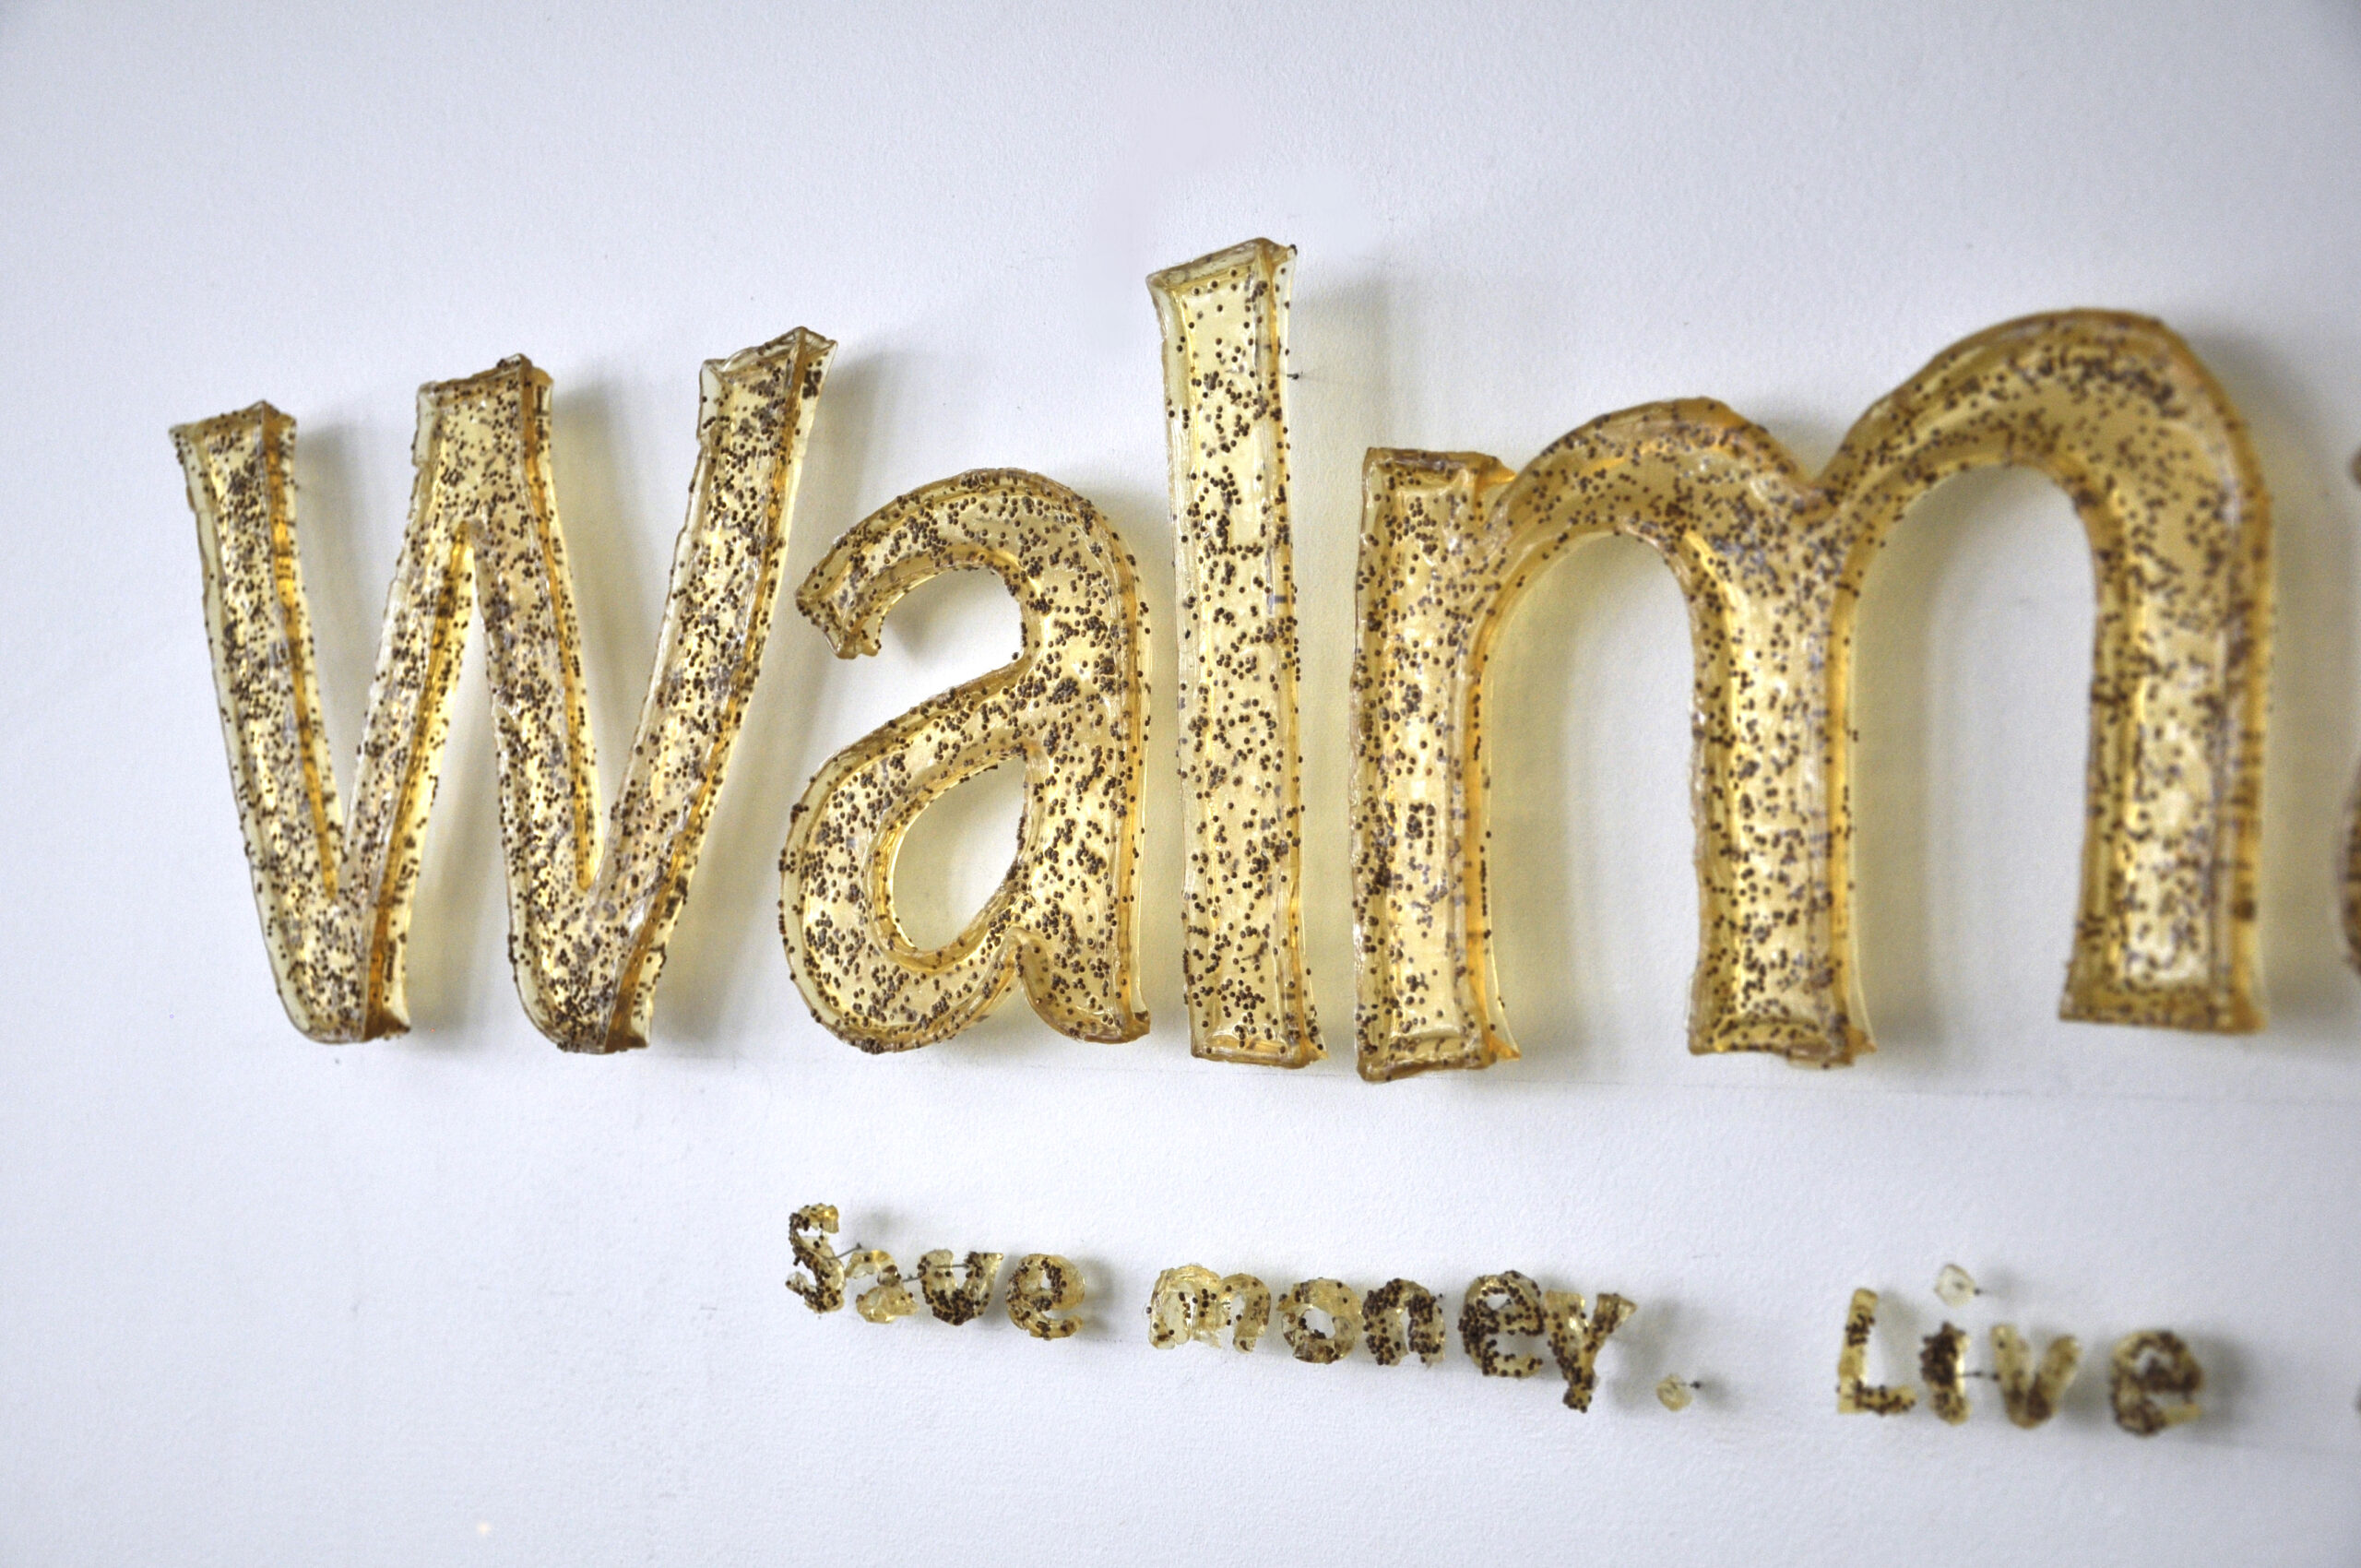 a Detail of Sculpture mounted on a wall in the form of the Walmart Logo including a starburst beside and the words Save money. Live Better. below in small letters. Created out of dried gelatin imbedded with Gypsy moth eggs